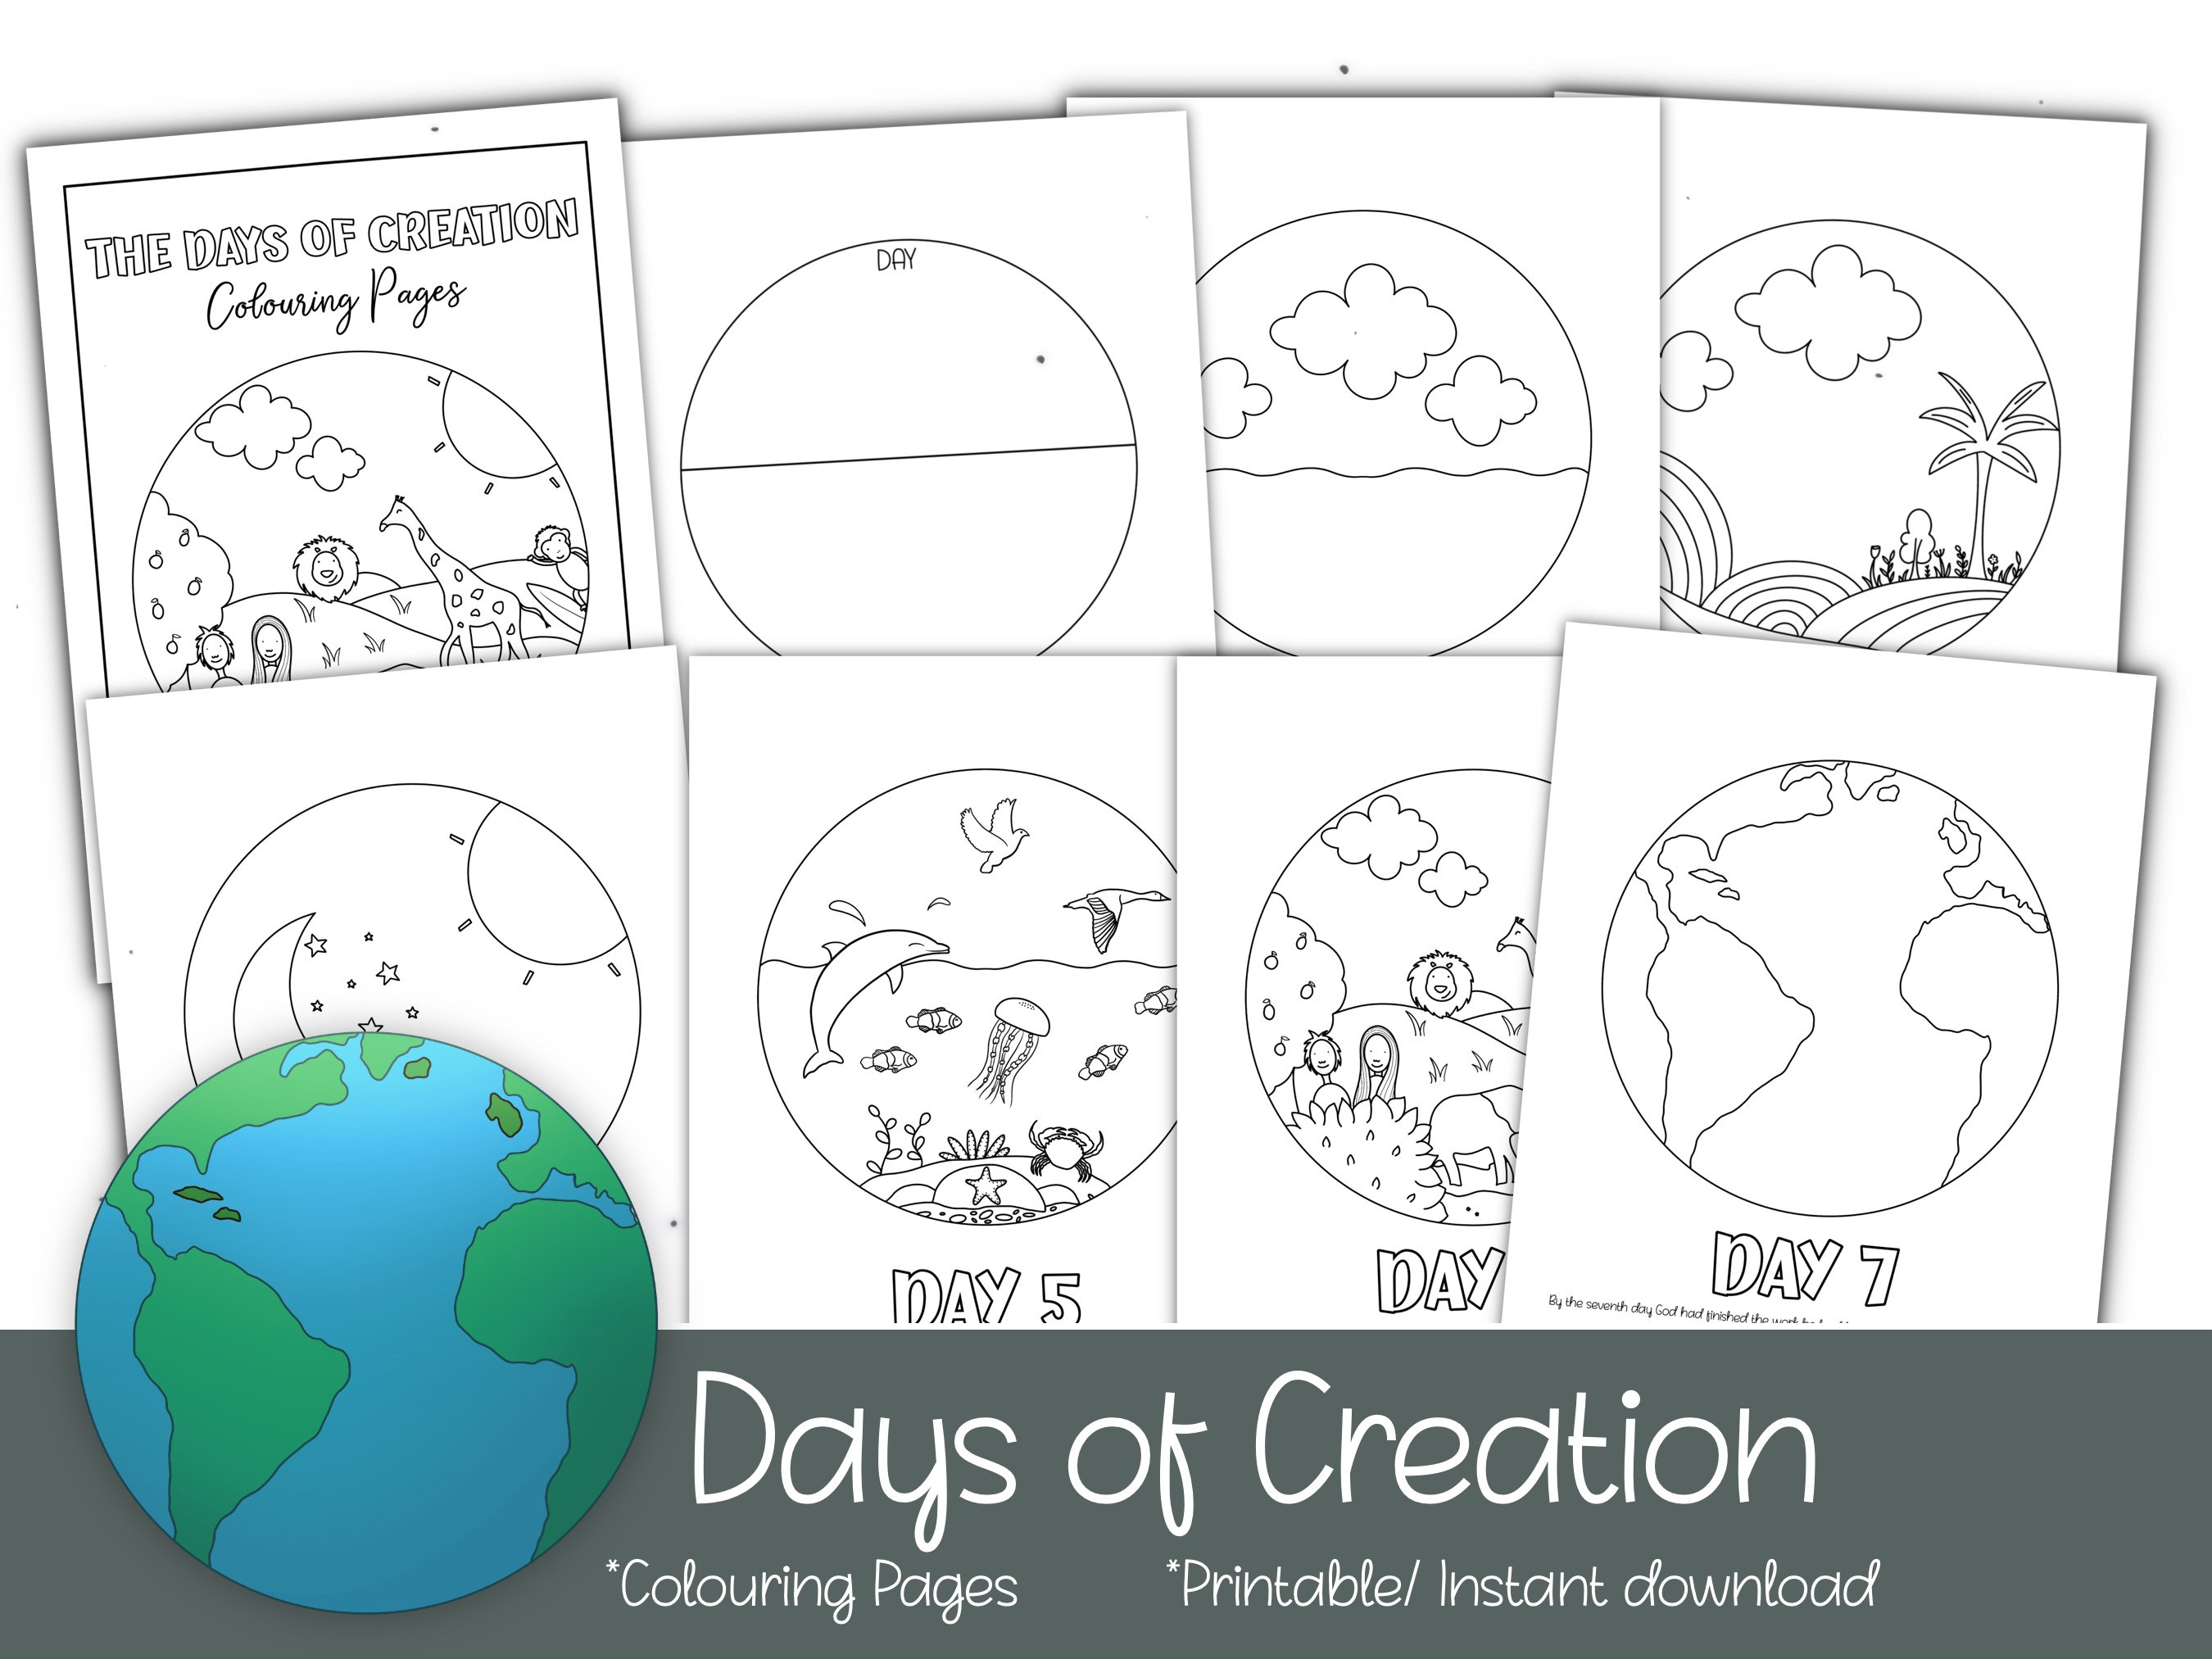 Printable colouring page days of creation sunday school colouring activity kids bible verse activity kids colouring digital download